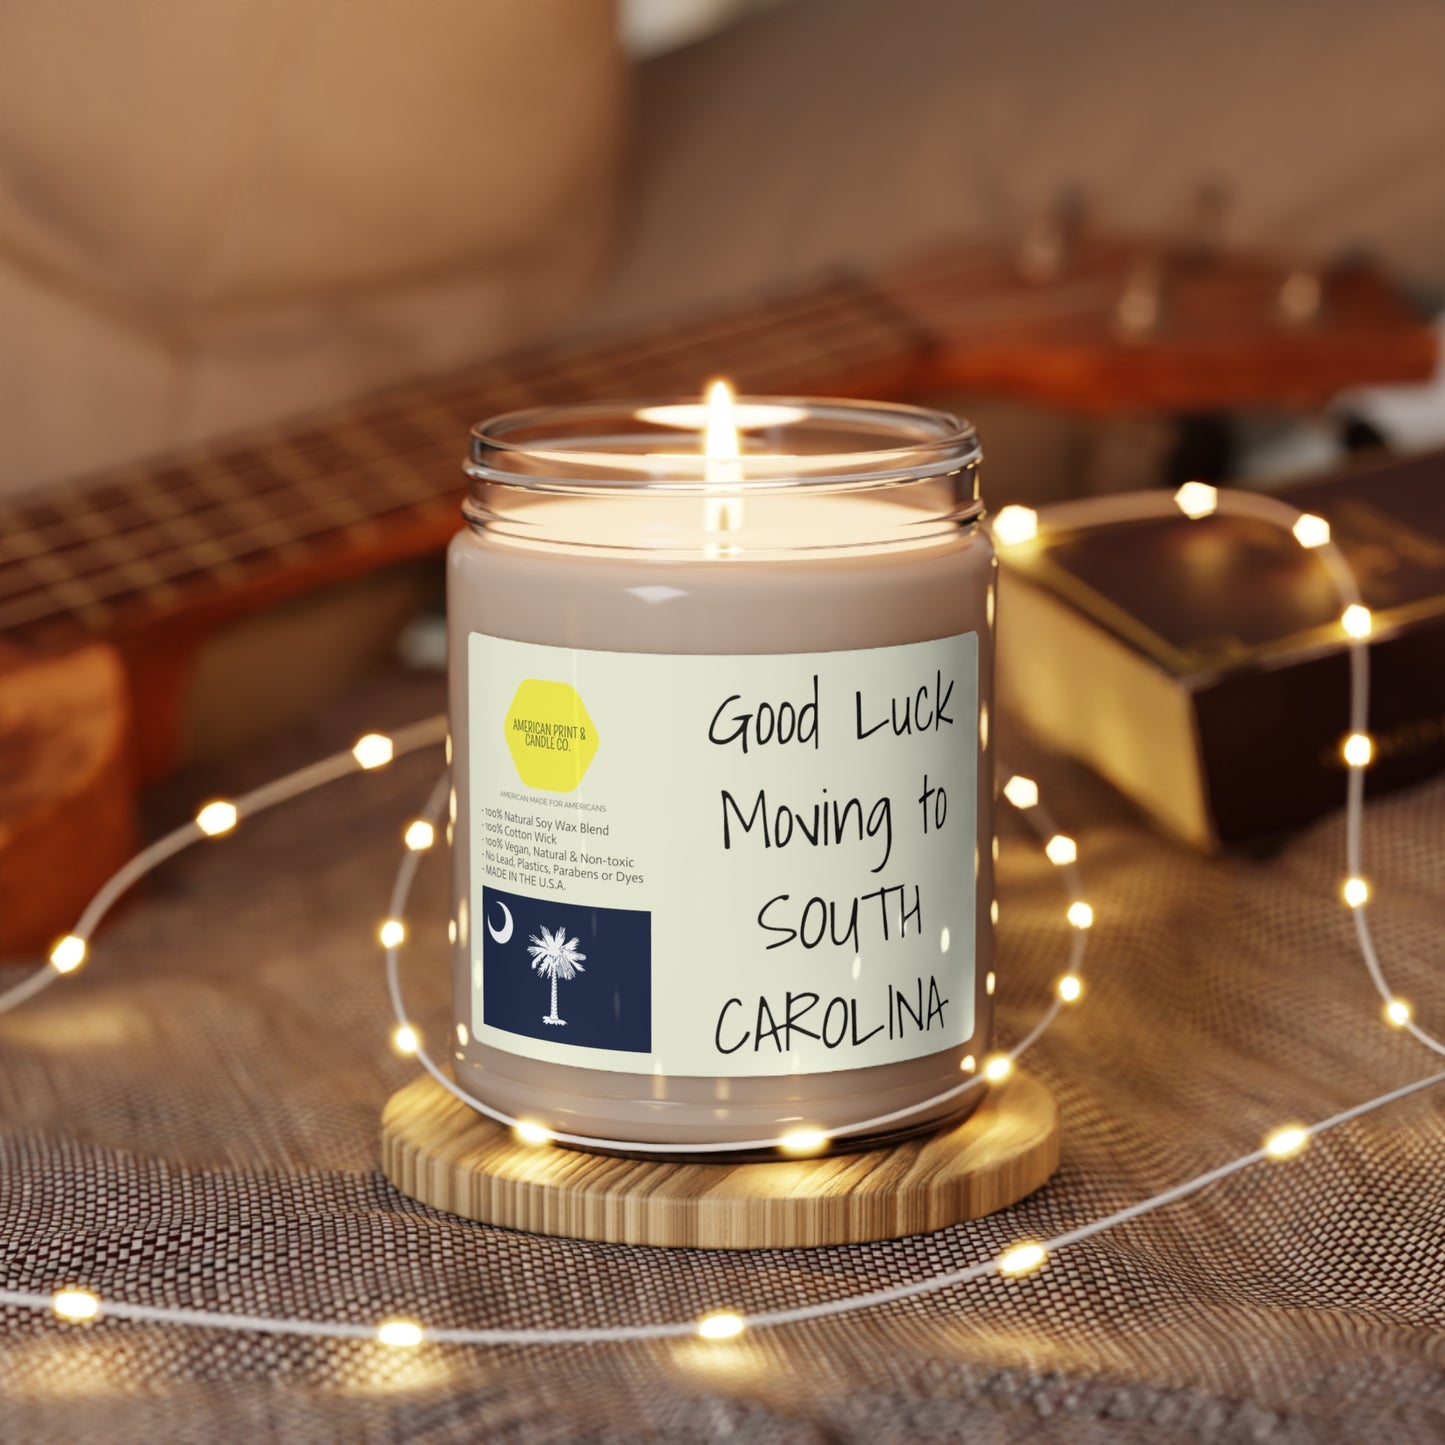 Good Luck moving to South Carolina scented Soy Candle, 9oz